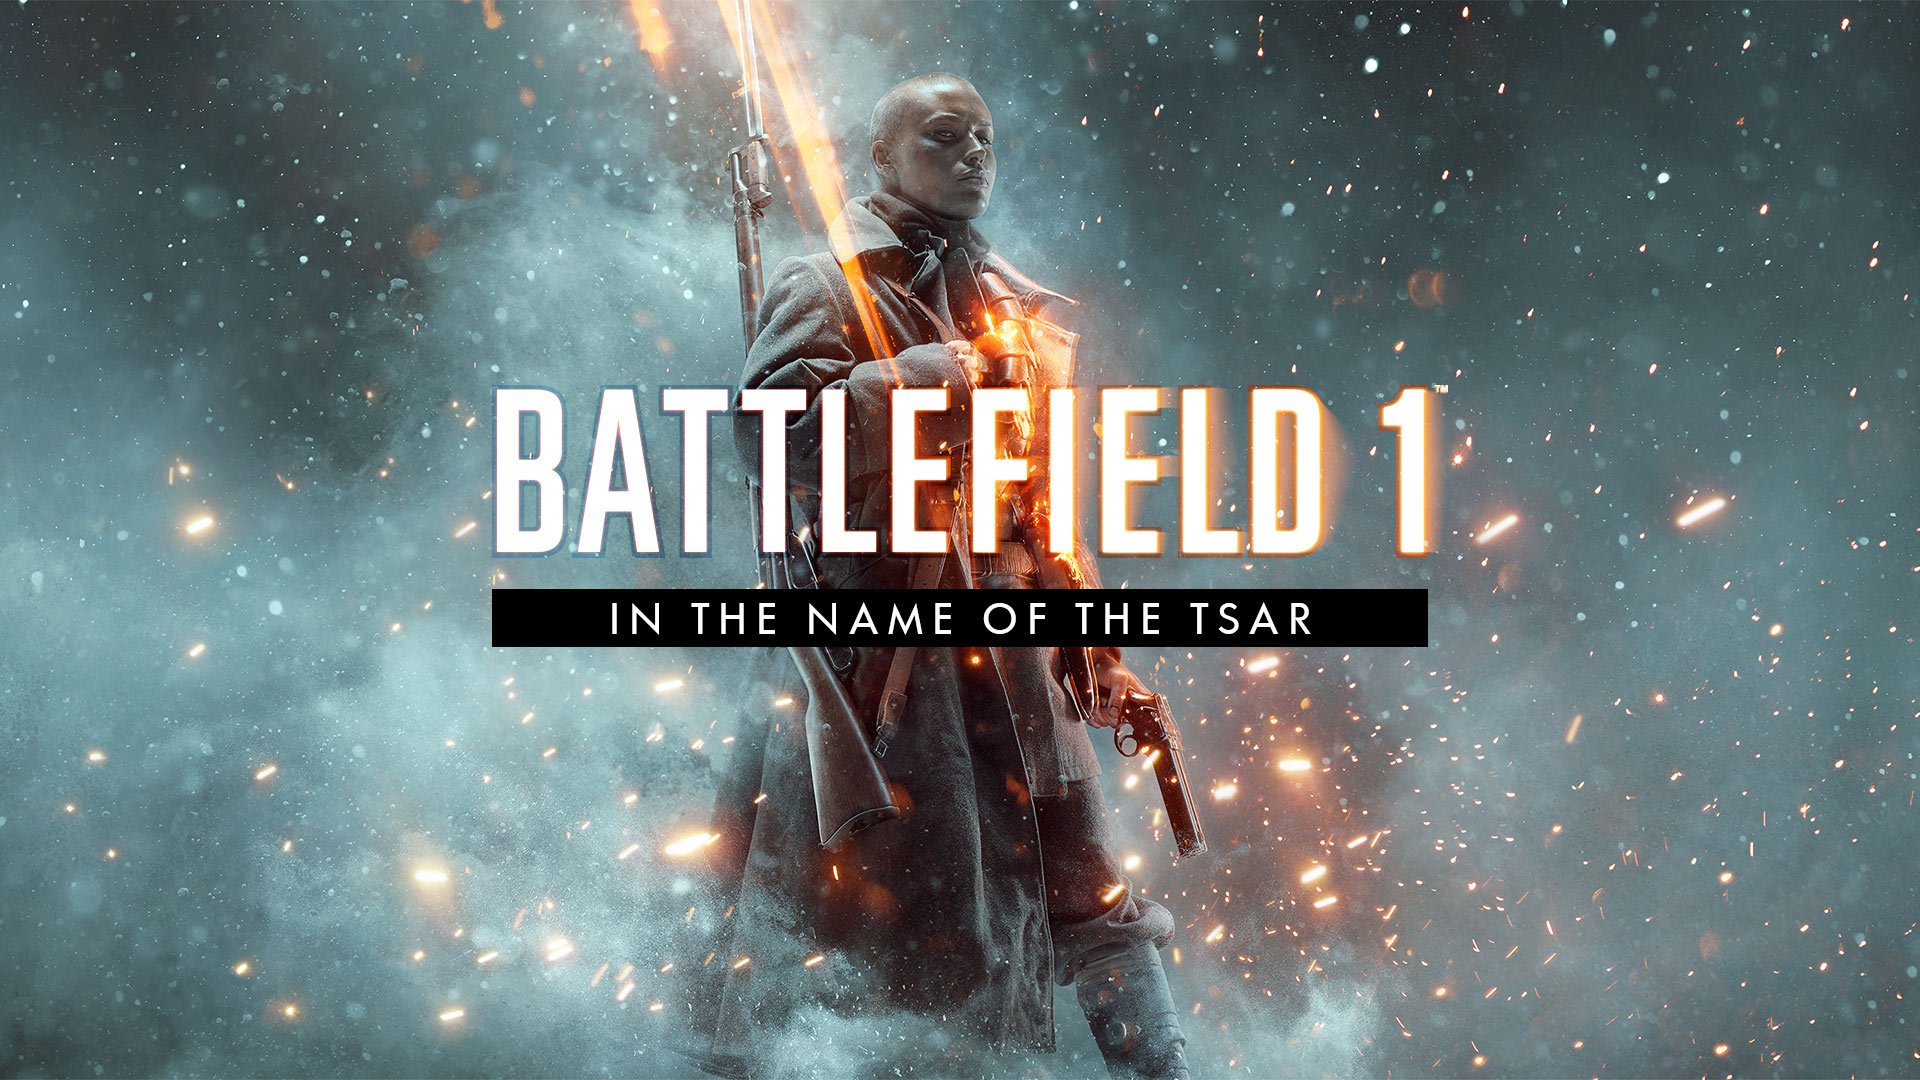 E3 2017: EA Unveils Battlefield 1 DLC - In The Name Of The Tsar